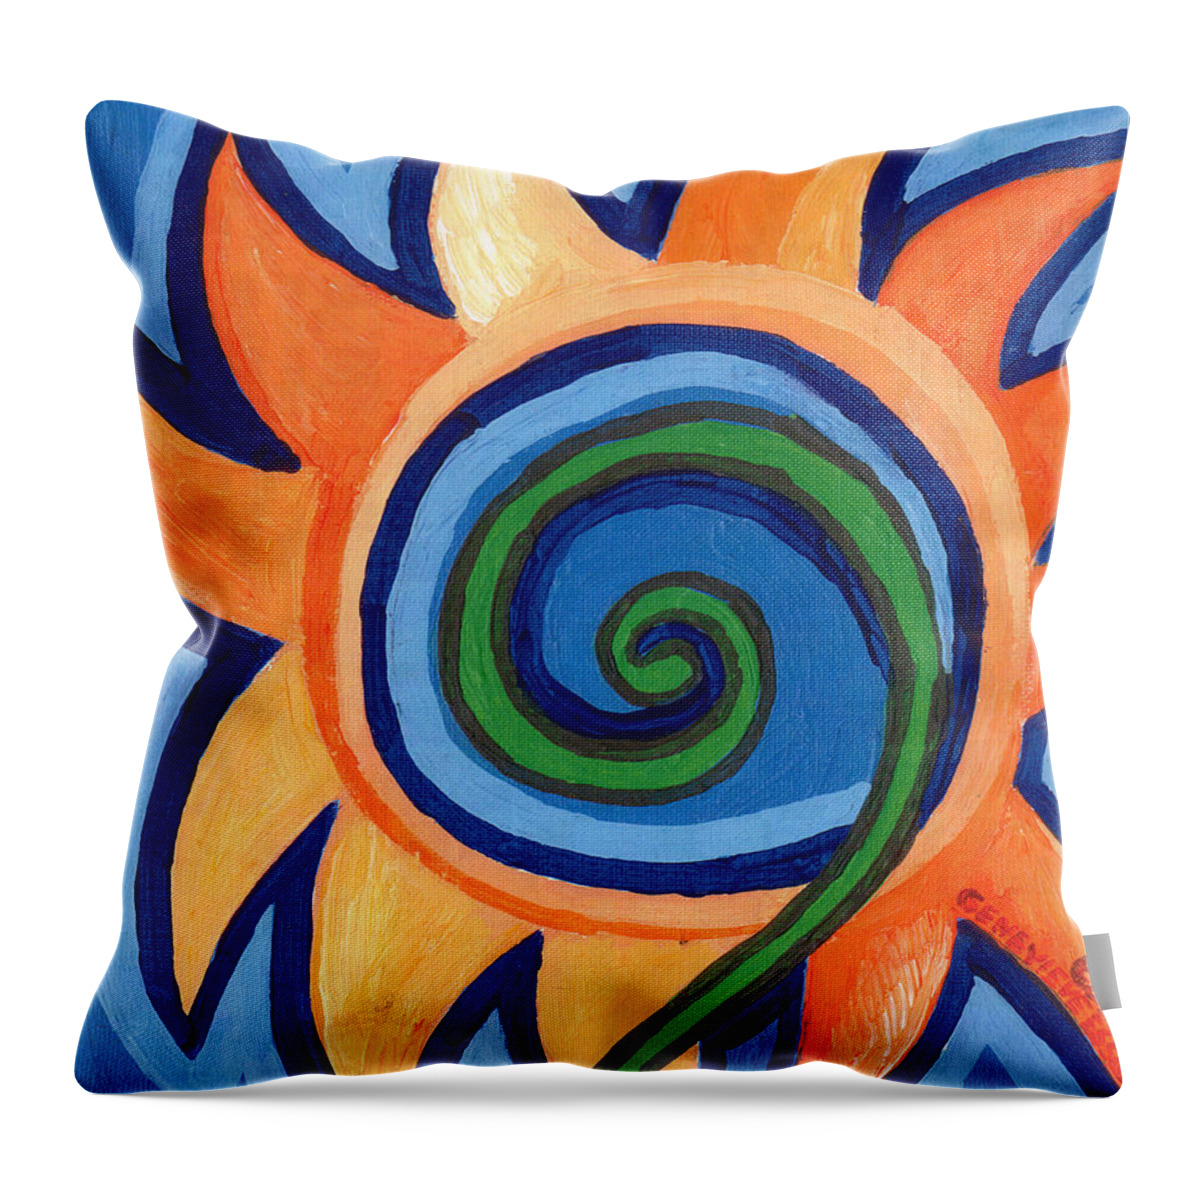 Flower Throw Pillow featuring the painting Flower Spiral by Genevieve Esson